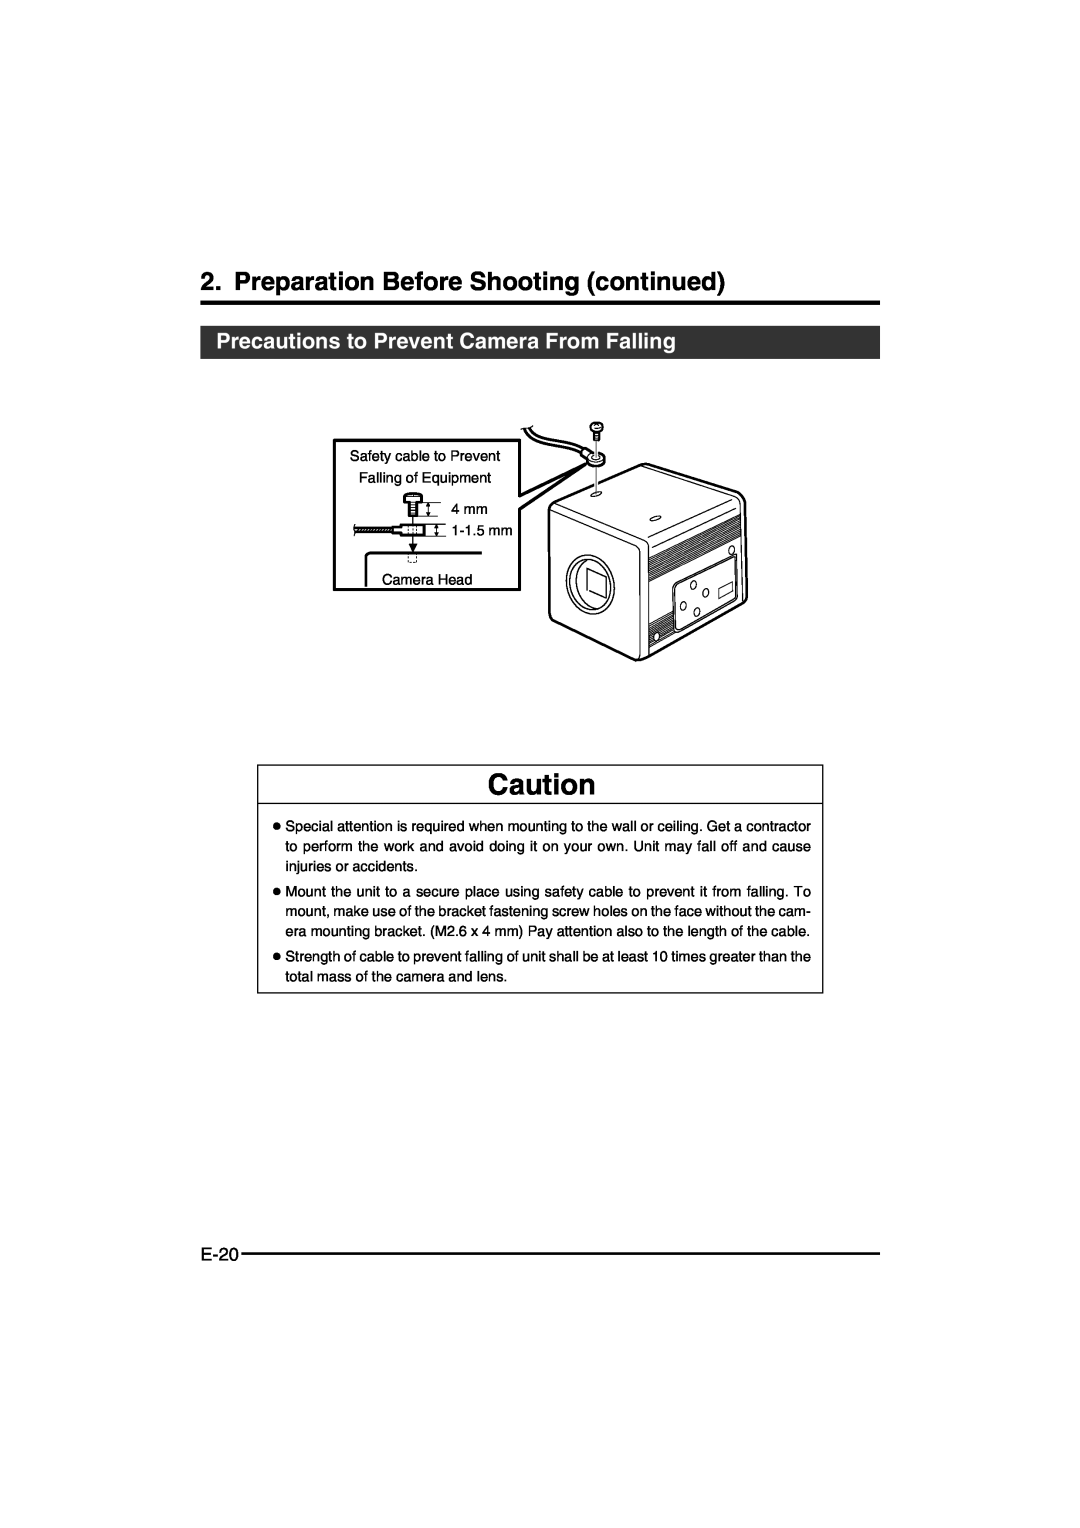 JVC KY-F550E instruction manual Precautions to Prevent Camera From Falling, E-20, Preparation Before Shooting continued 